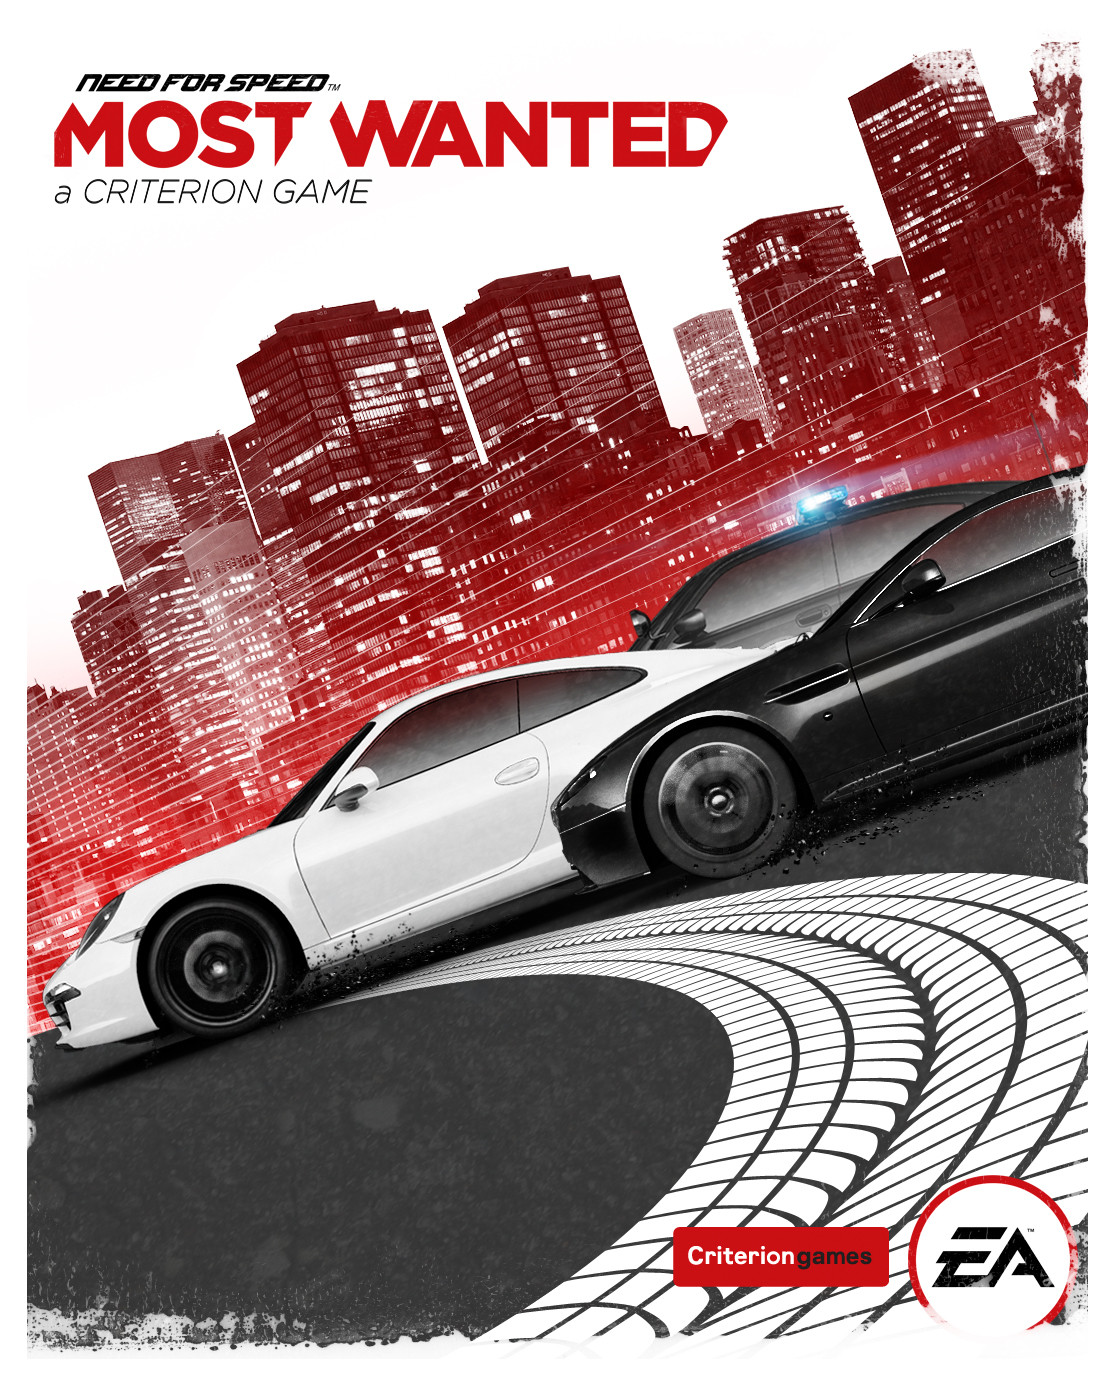 Need For Speed: Most Wanted Wii U Will Feature Off-TV Play - My Nintendo  News